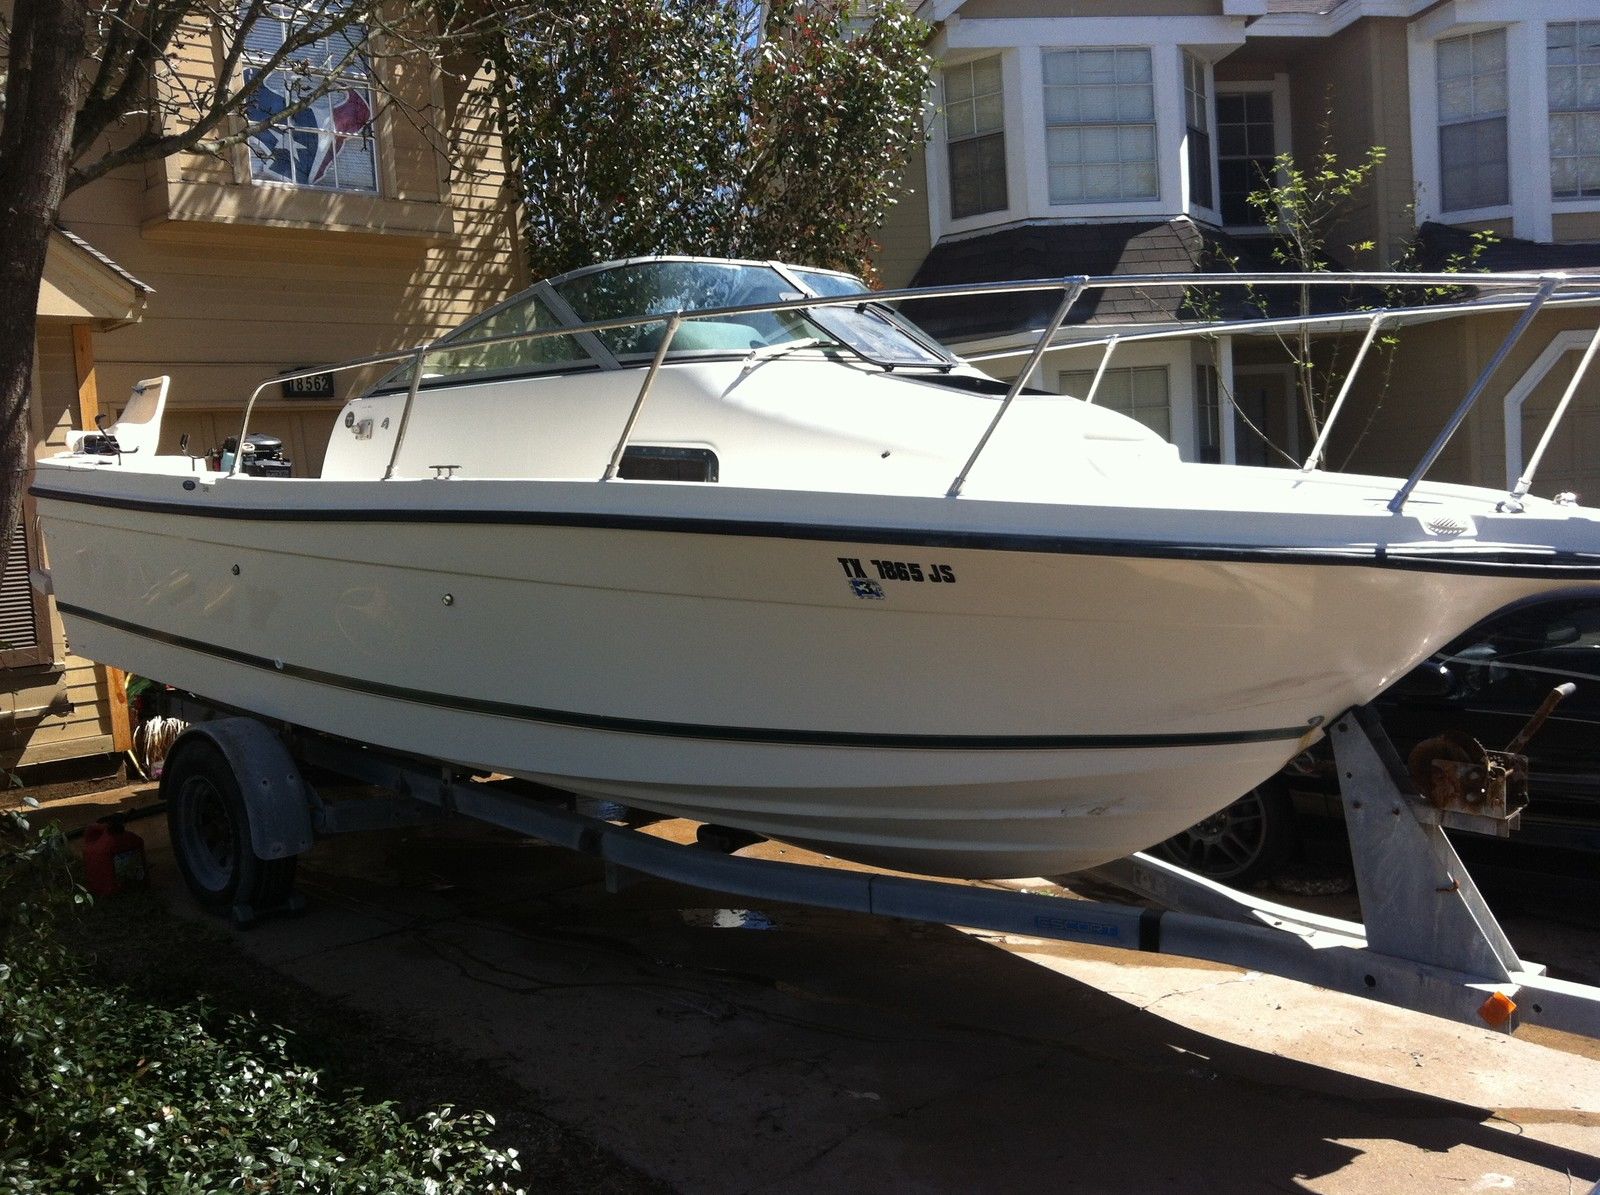 Bayliner Trophy 2002 2000 for sale for $4,800 - Boats-from ...